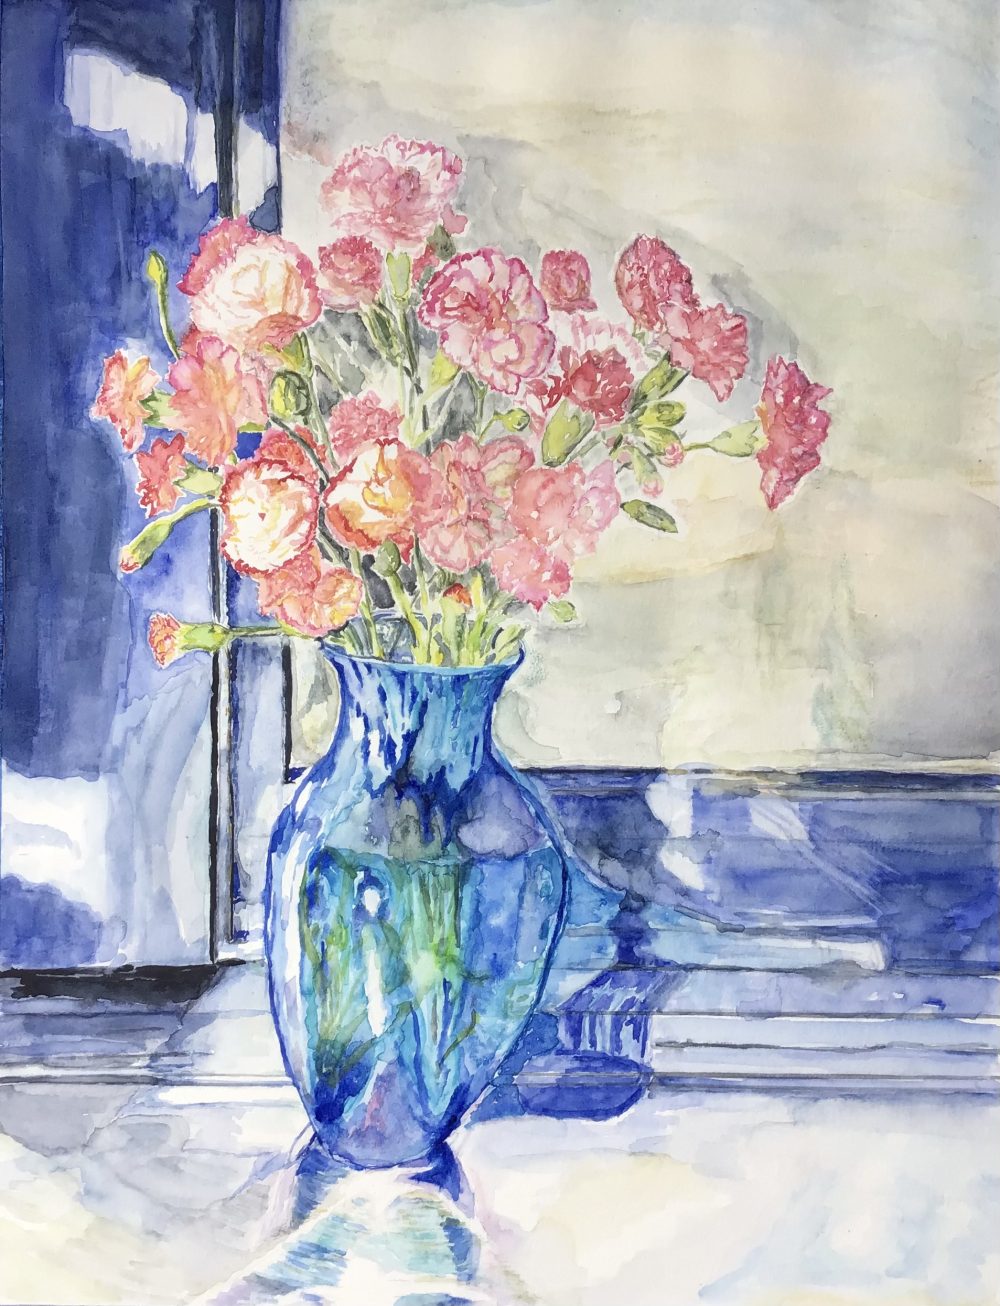 Mid-morning sunlight is striking the front of a blue glass vase with bunch of orange-pink carnations on a stainless steel counter set in front of a window with an indigo frame.